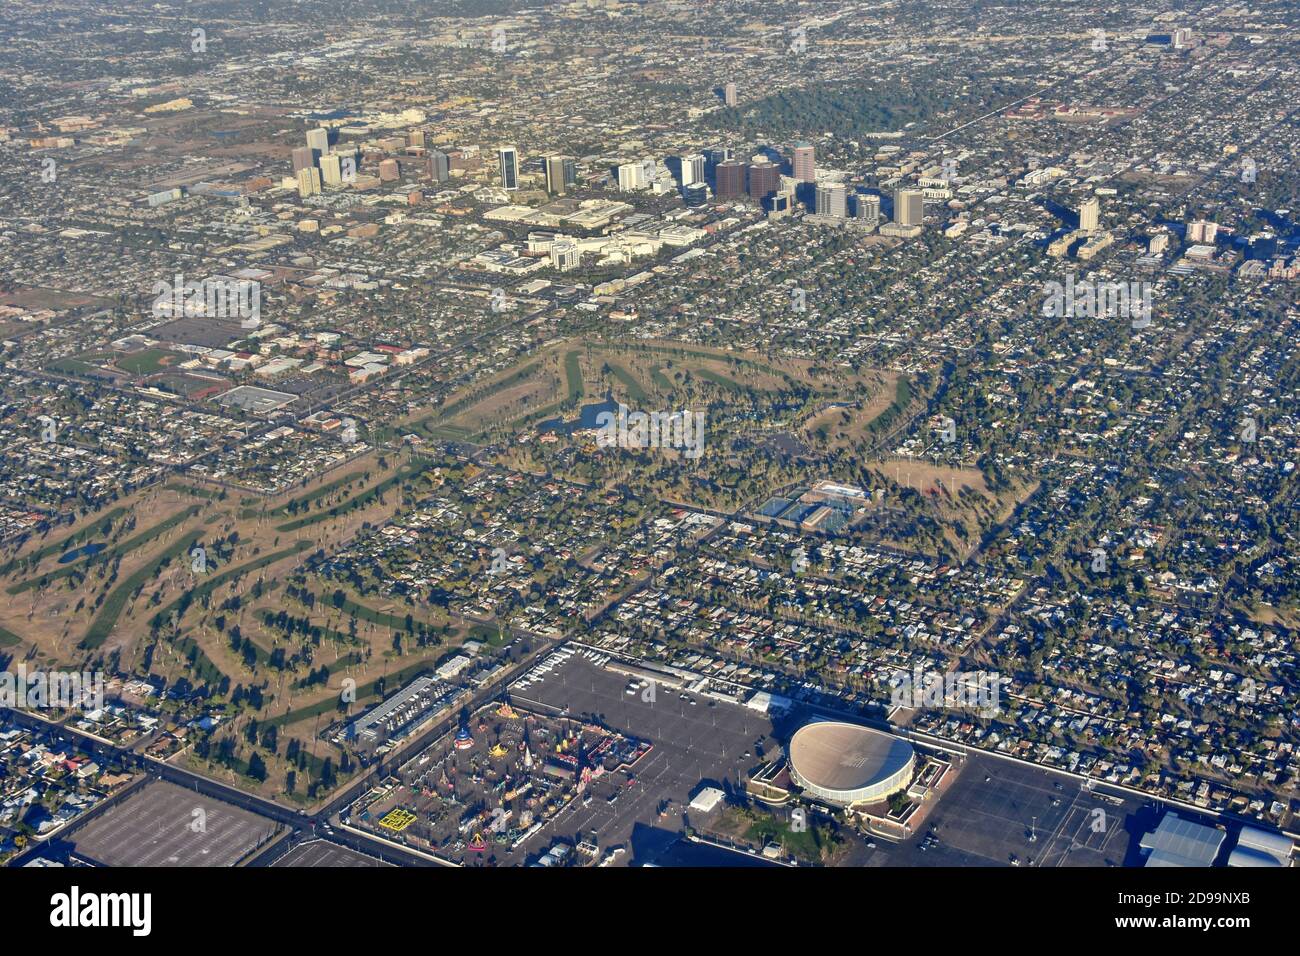 Aerial landscape view of Phoenix, Arizona with Arizona Veterans Memorial Coliseum, golf course, amusement park and city skyline in the view. Stock Photo